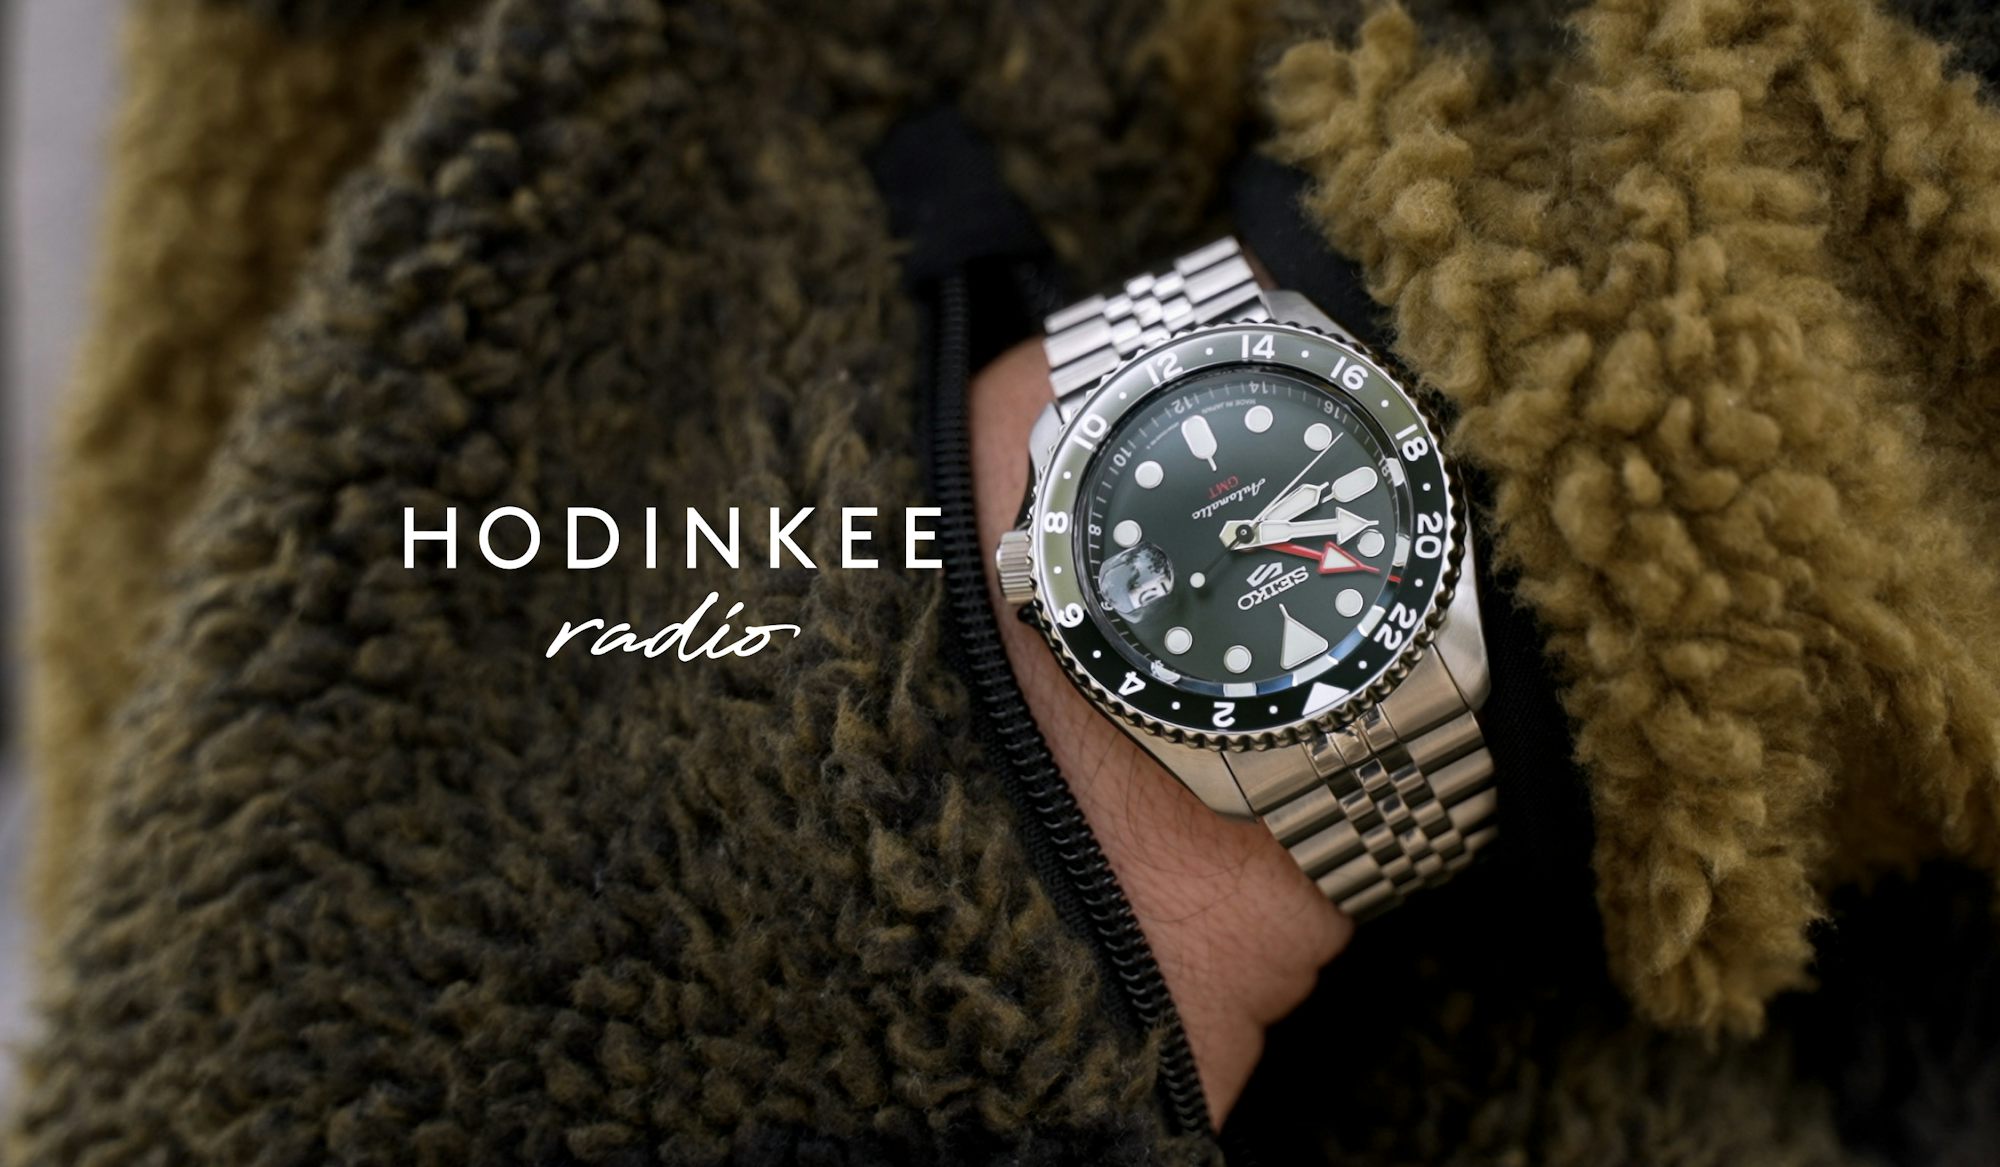 HODINKEE Radio: Talking About Our Favorite GMT Watches From Tudor, Longines, And More